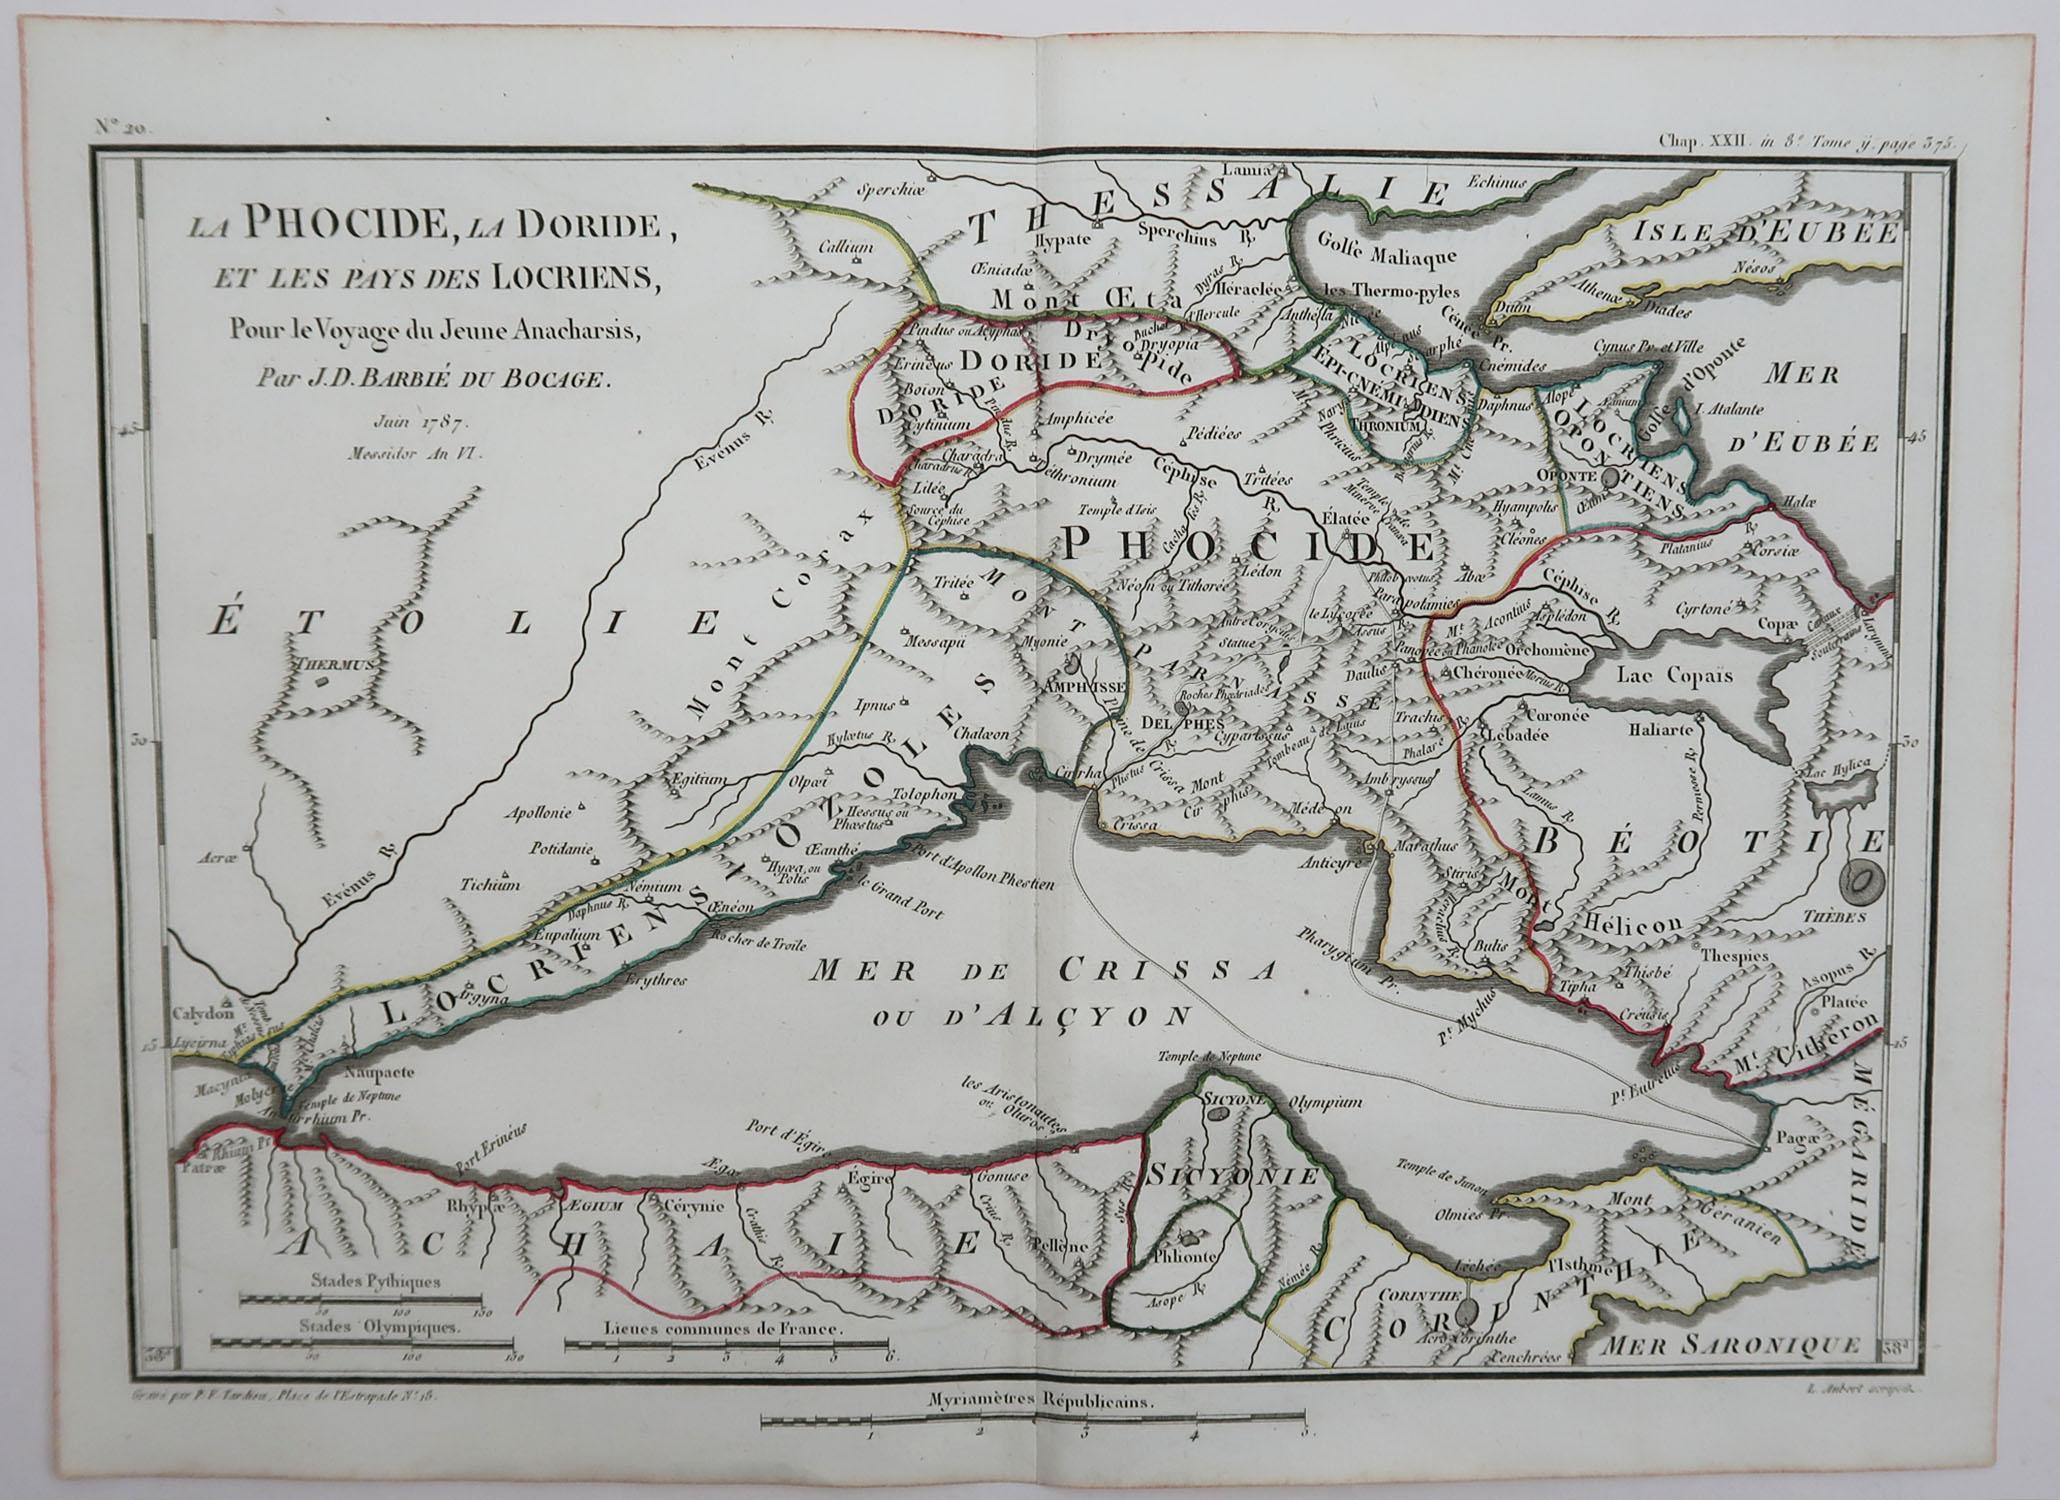 Other Original Antique Map of Ancient Greece, Phocis, Gulf of Corinth, 1787